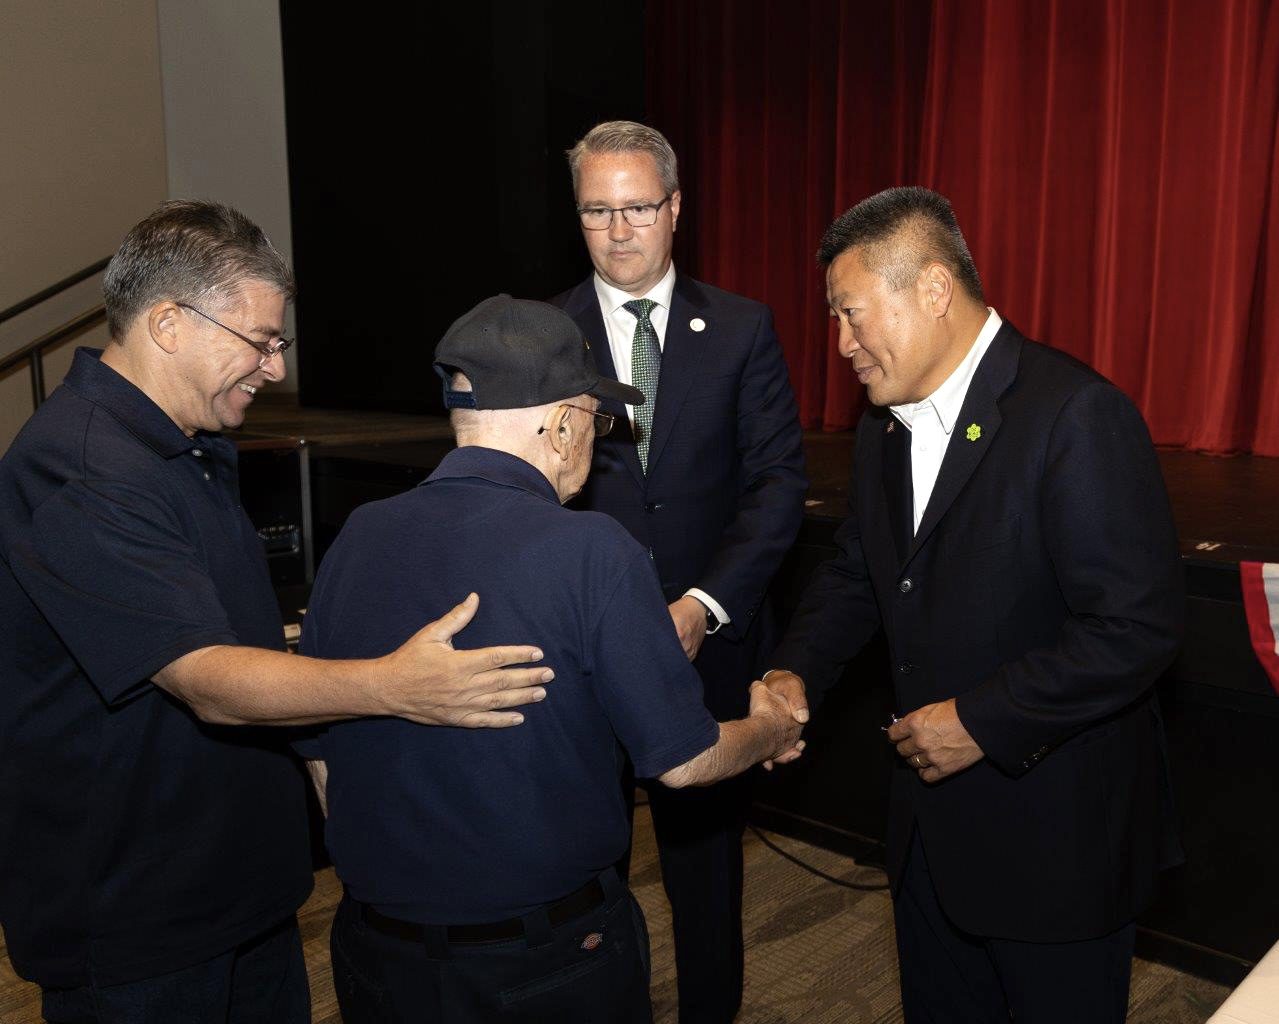 Sen. Tony Hwang (at right) thanks a veteran during the Sep. 21 Connecticut Wartime Service Medal Ceremony at Newtown High School.